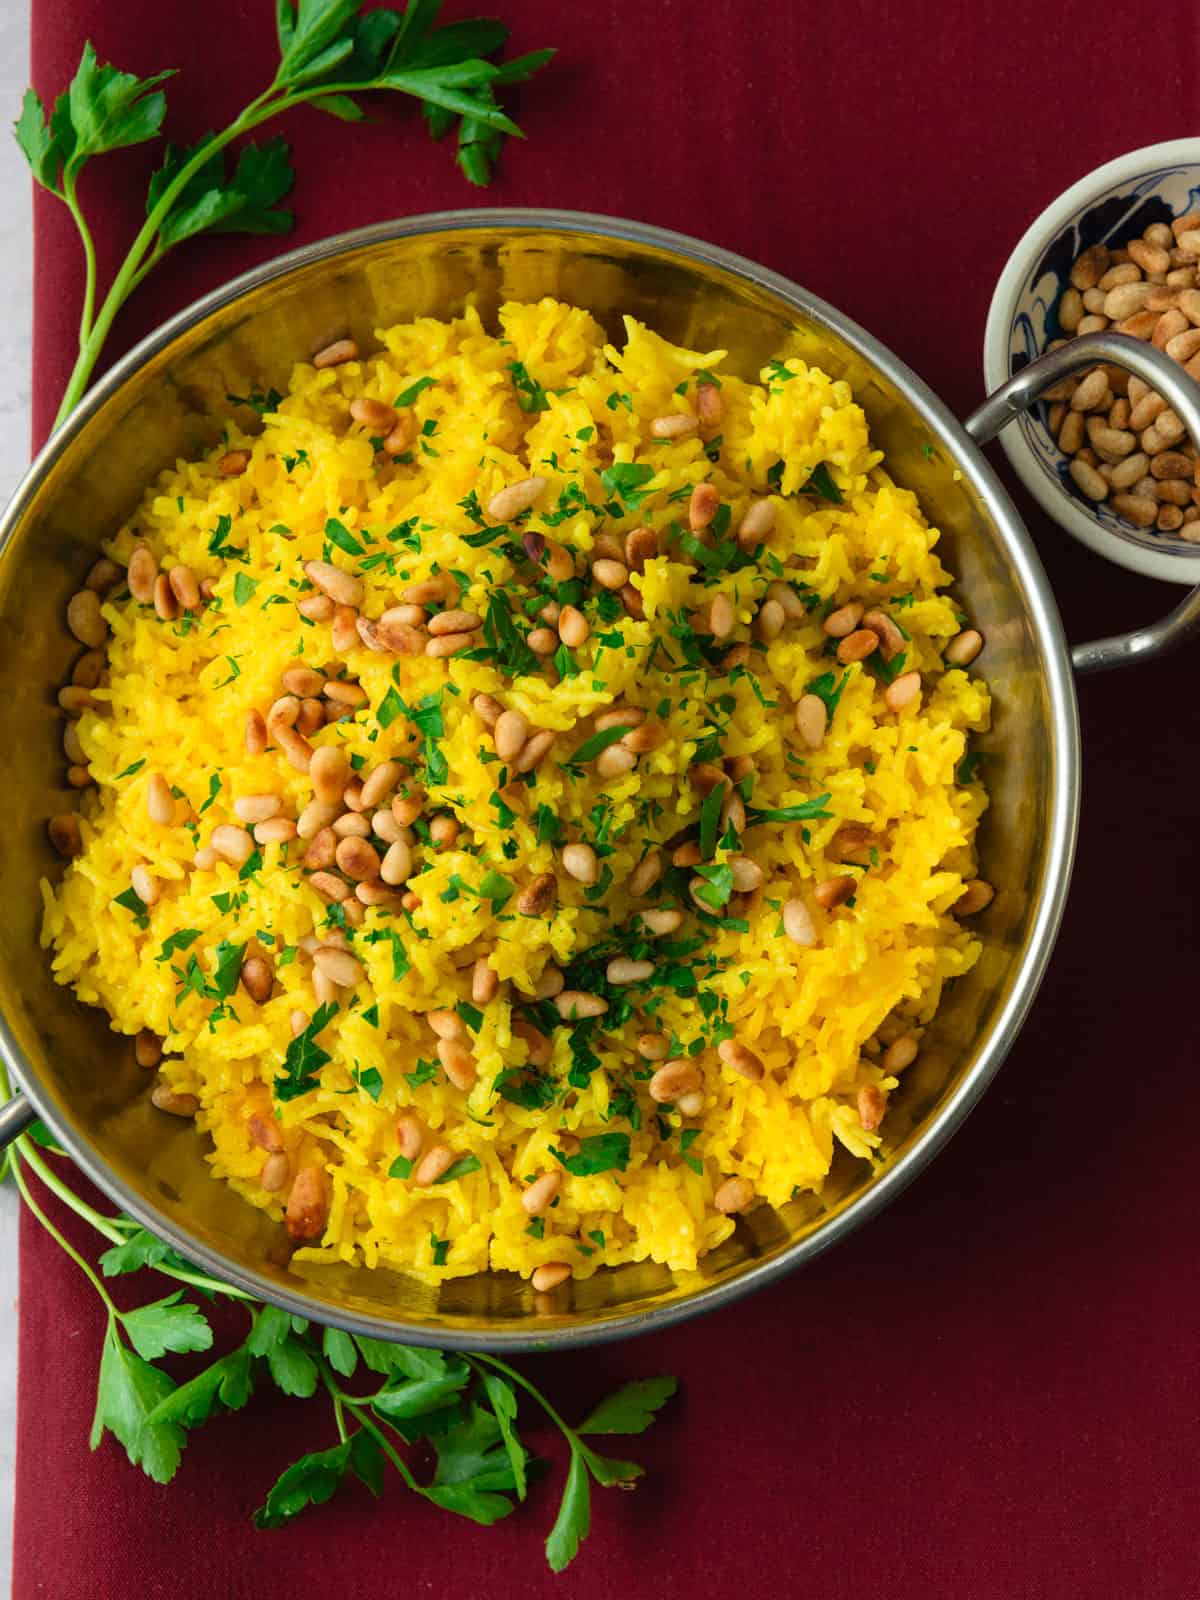 Yellow Mediterranean rice with toasted pine nuts.